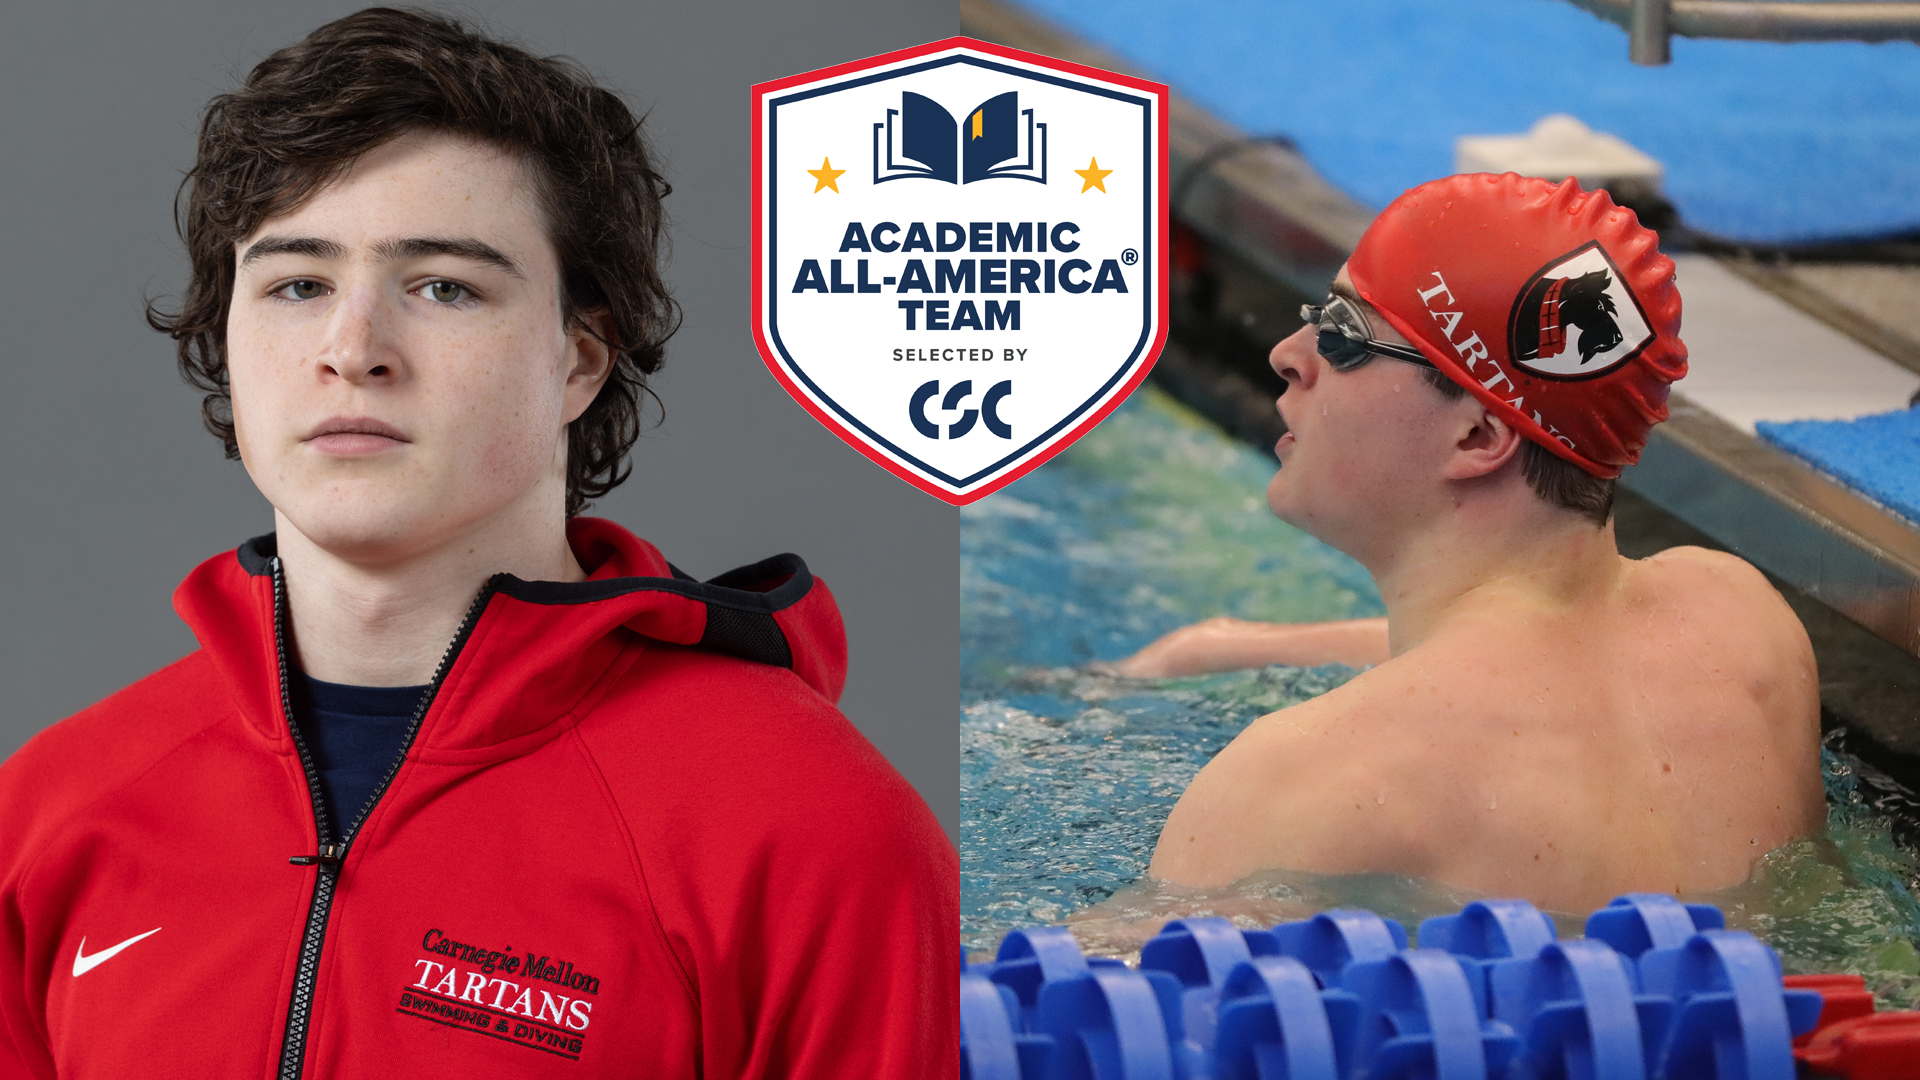 portrait image of a male in a red zipped jacket with a photo of a male in a pool with a red cap. Includes a logo of Academic All-America Team CSC